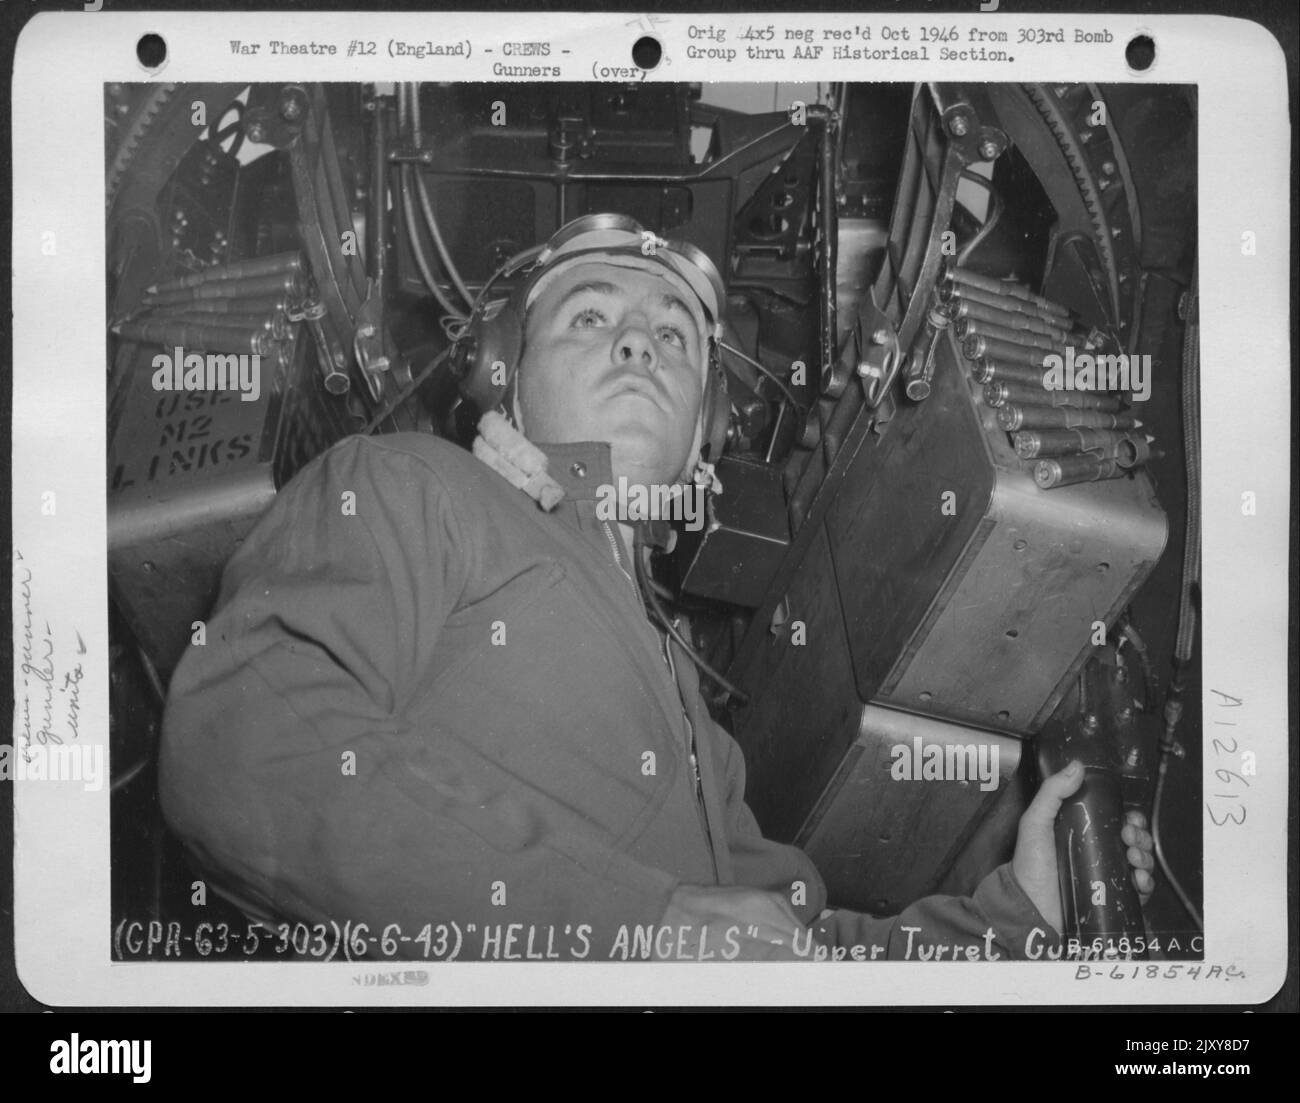 Upper Turret Gunner On The Boeing B-17 'Flying Fortress' Hell'S Angels In Position He Would Assume On A Bombing Mission. 303Rd Bomb Group, England. 6 June 1943. Stock Photo